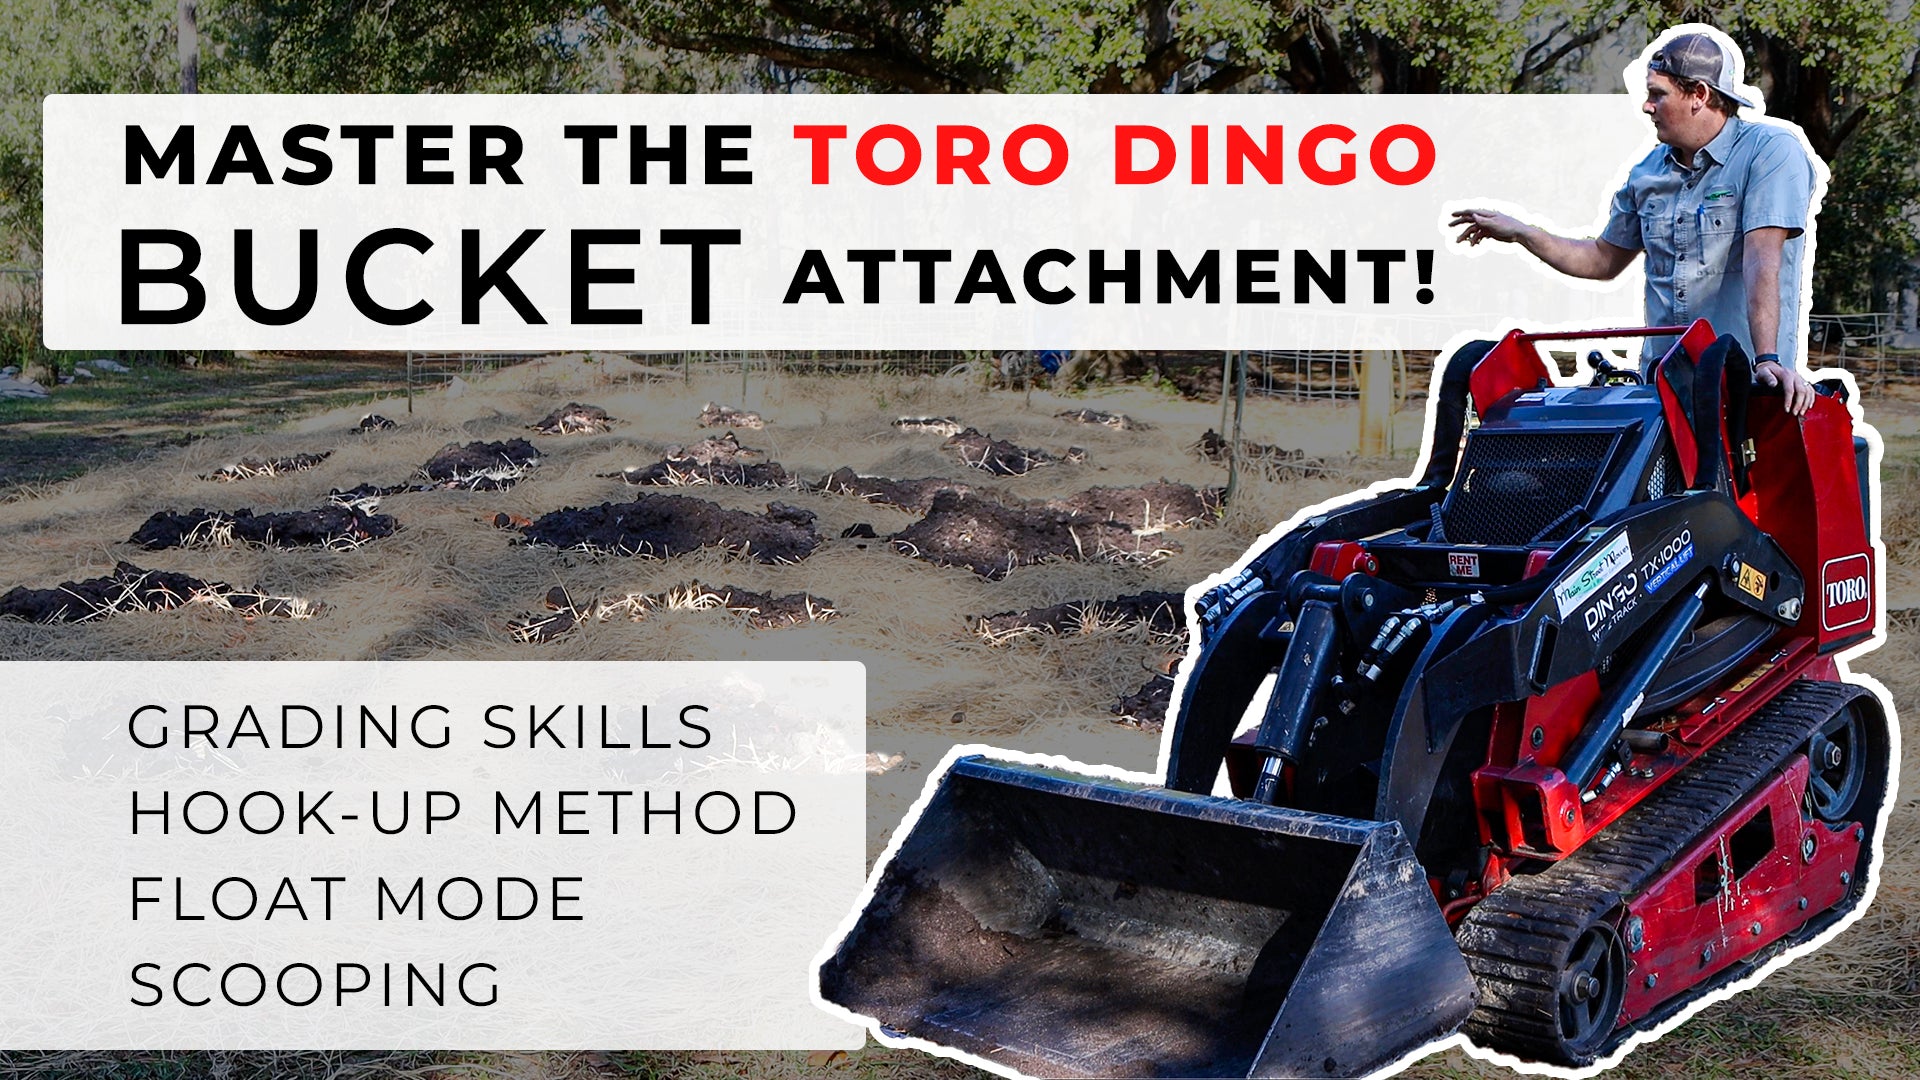 Master the Toro Dingo bucket attachment in minutes! Discover easy, effective techniques to accelerate your gardening tasks.